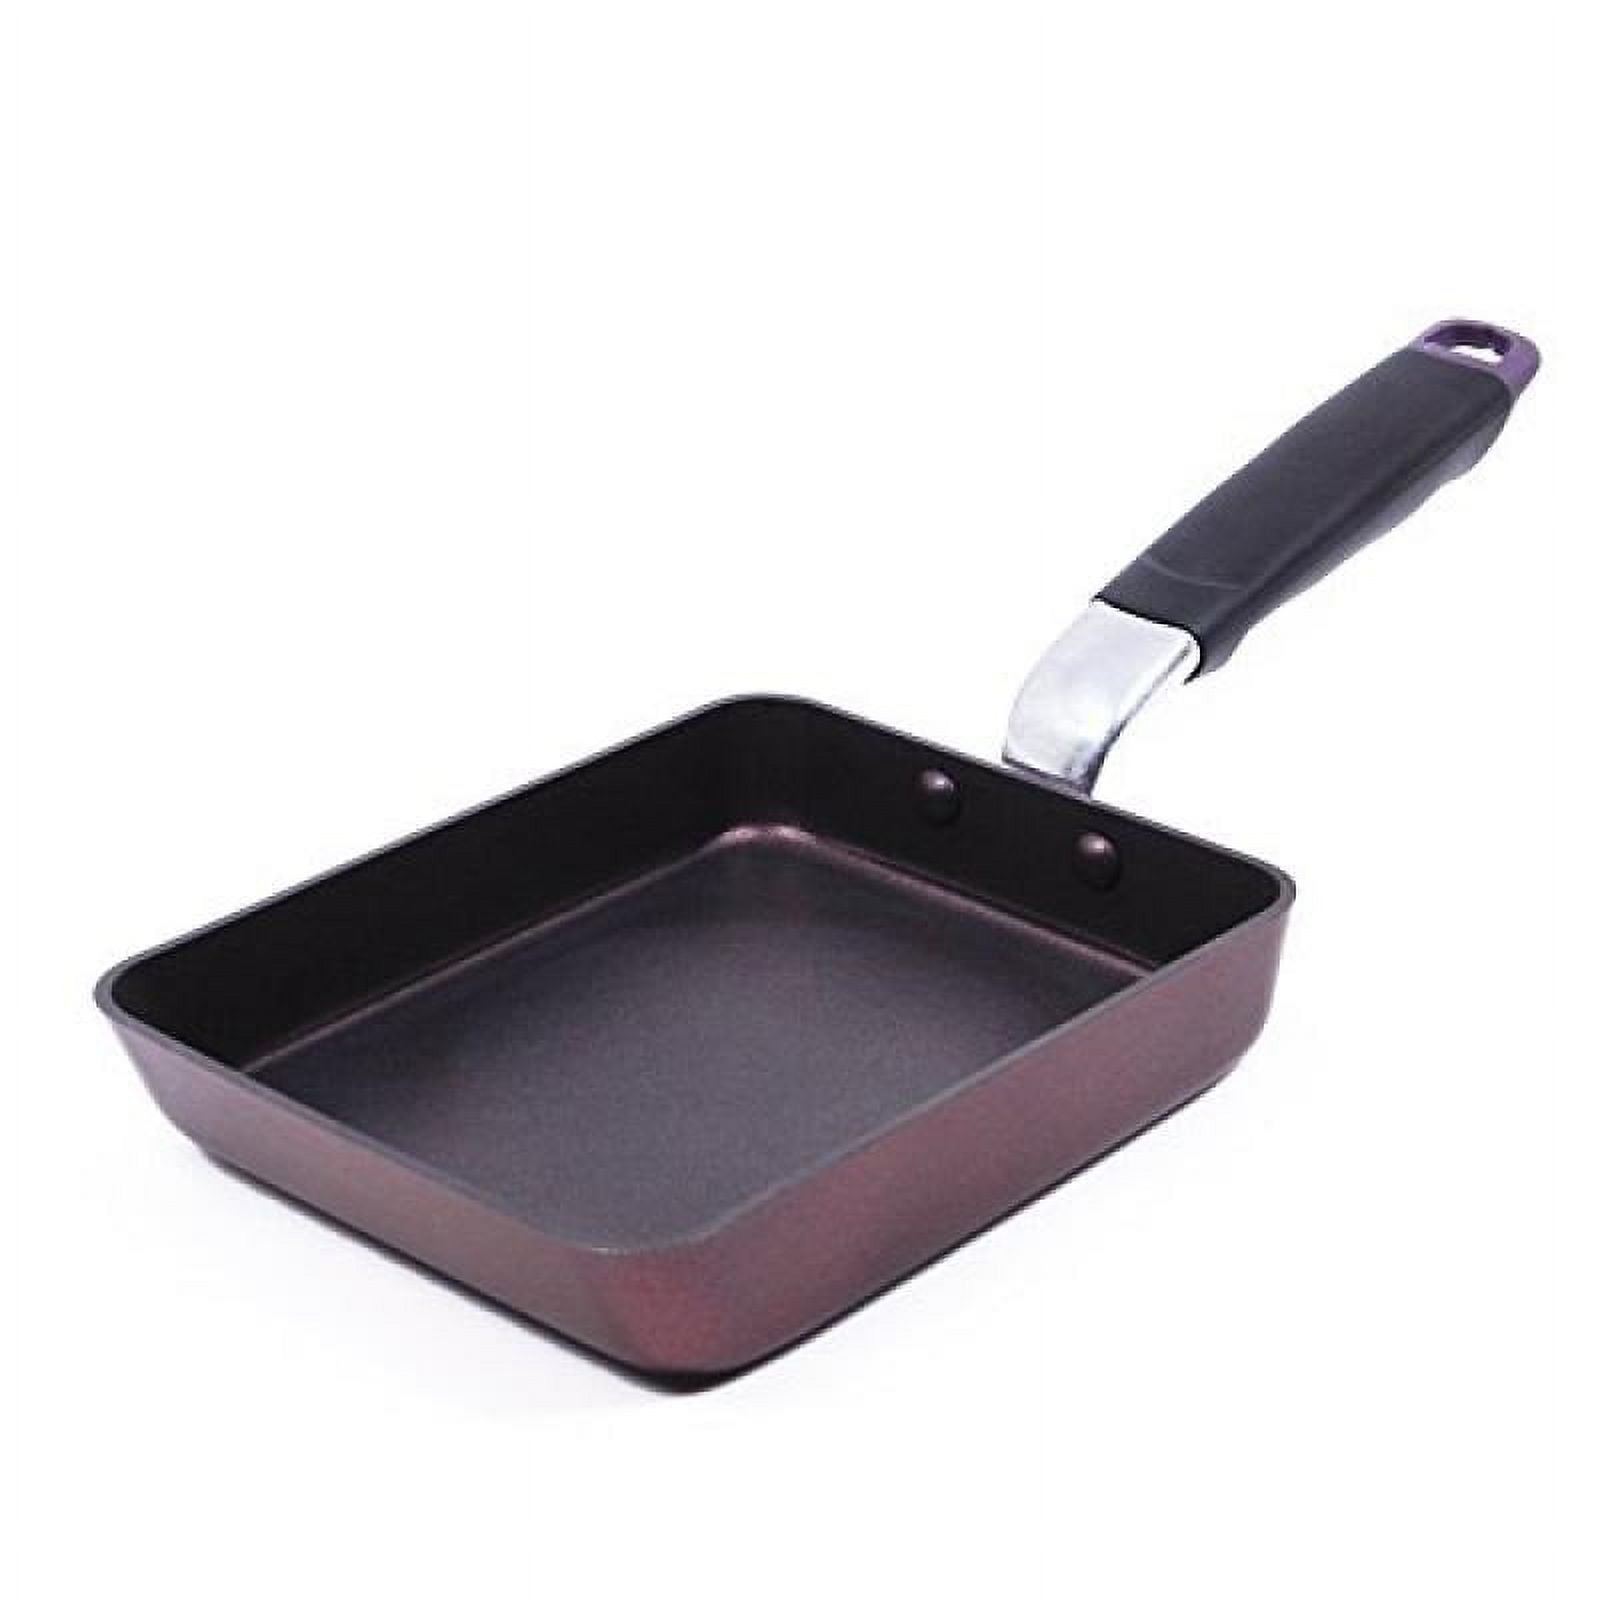 MsMk Small Frying Pan, 8-Inch Nonstick Durable Egg Omelet Skillet, Titanium and Diamond Non Stick Coating from USA, 4mm Stainles